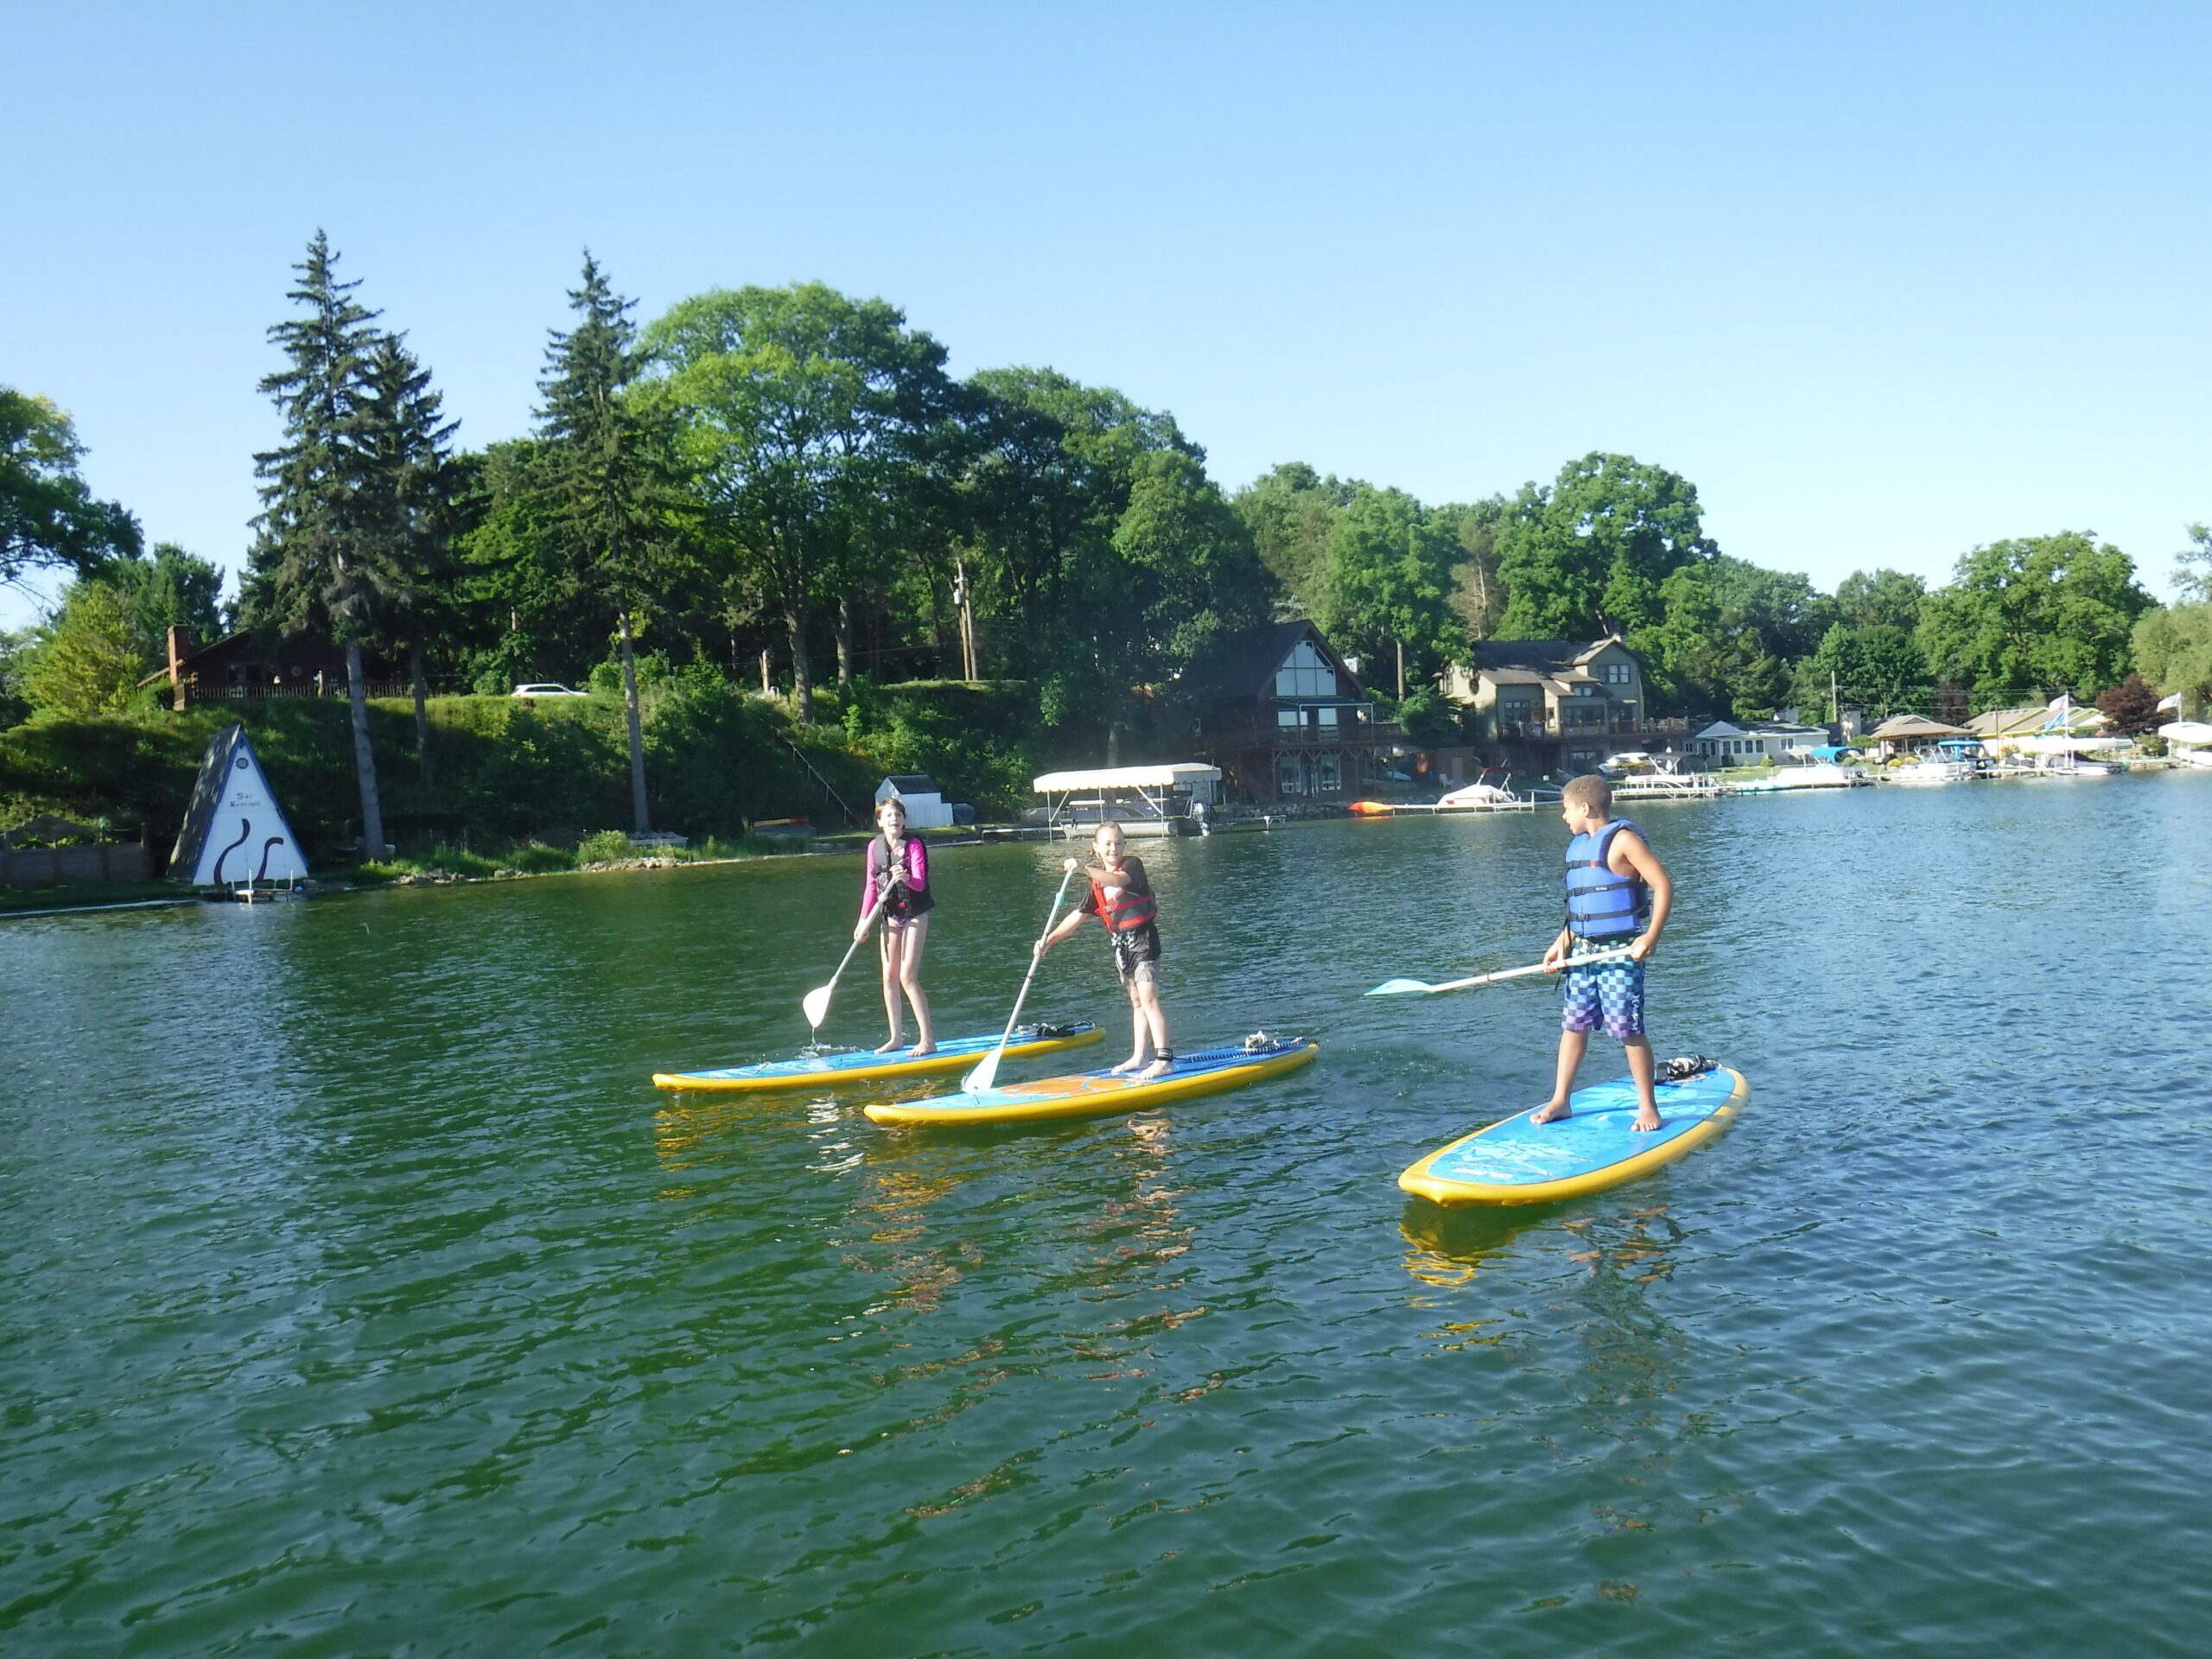 Match Made in Heaven: Stand-up Paddle Boarding + Yoga = SUP Yoga